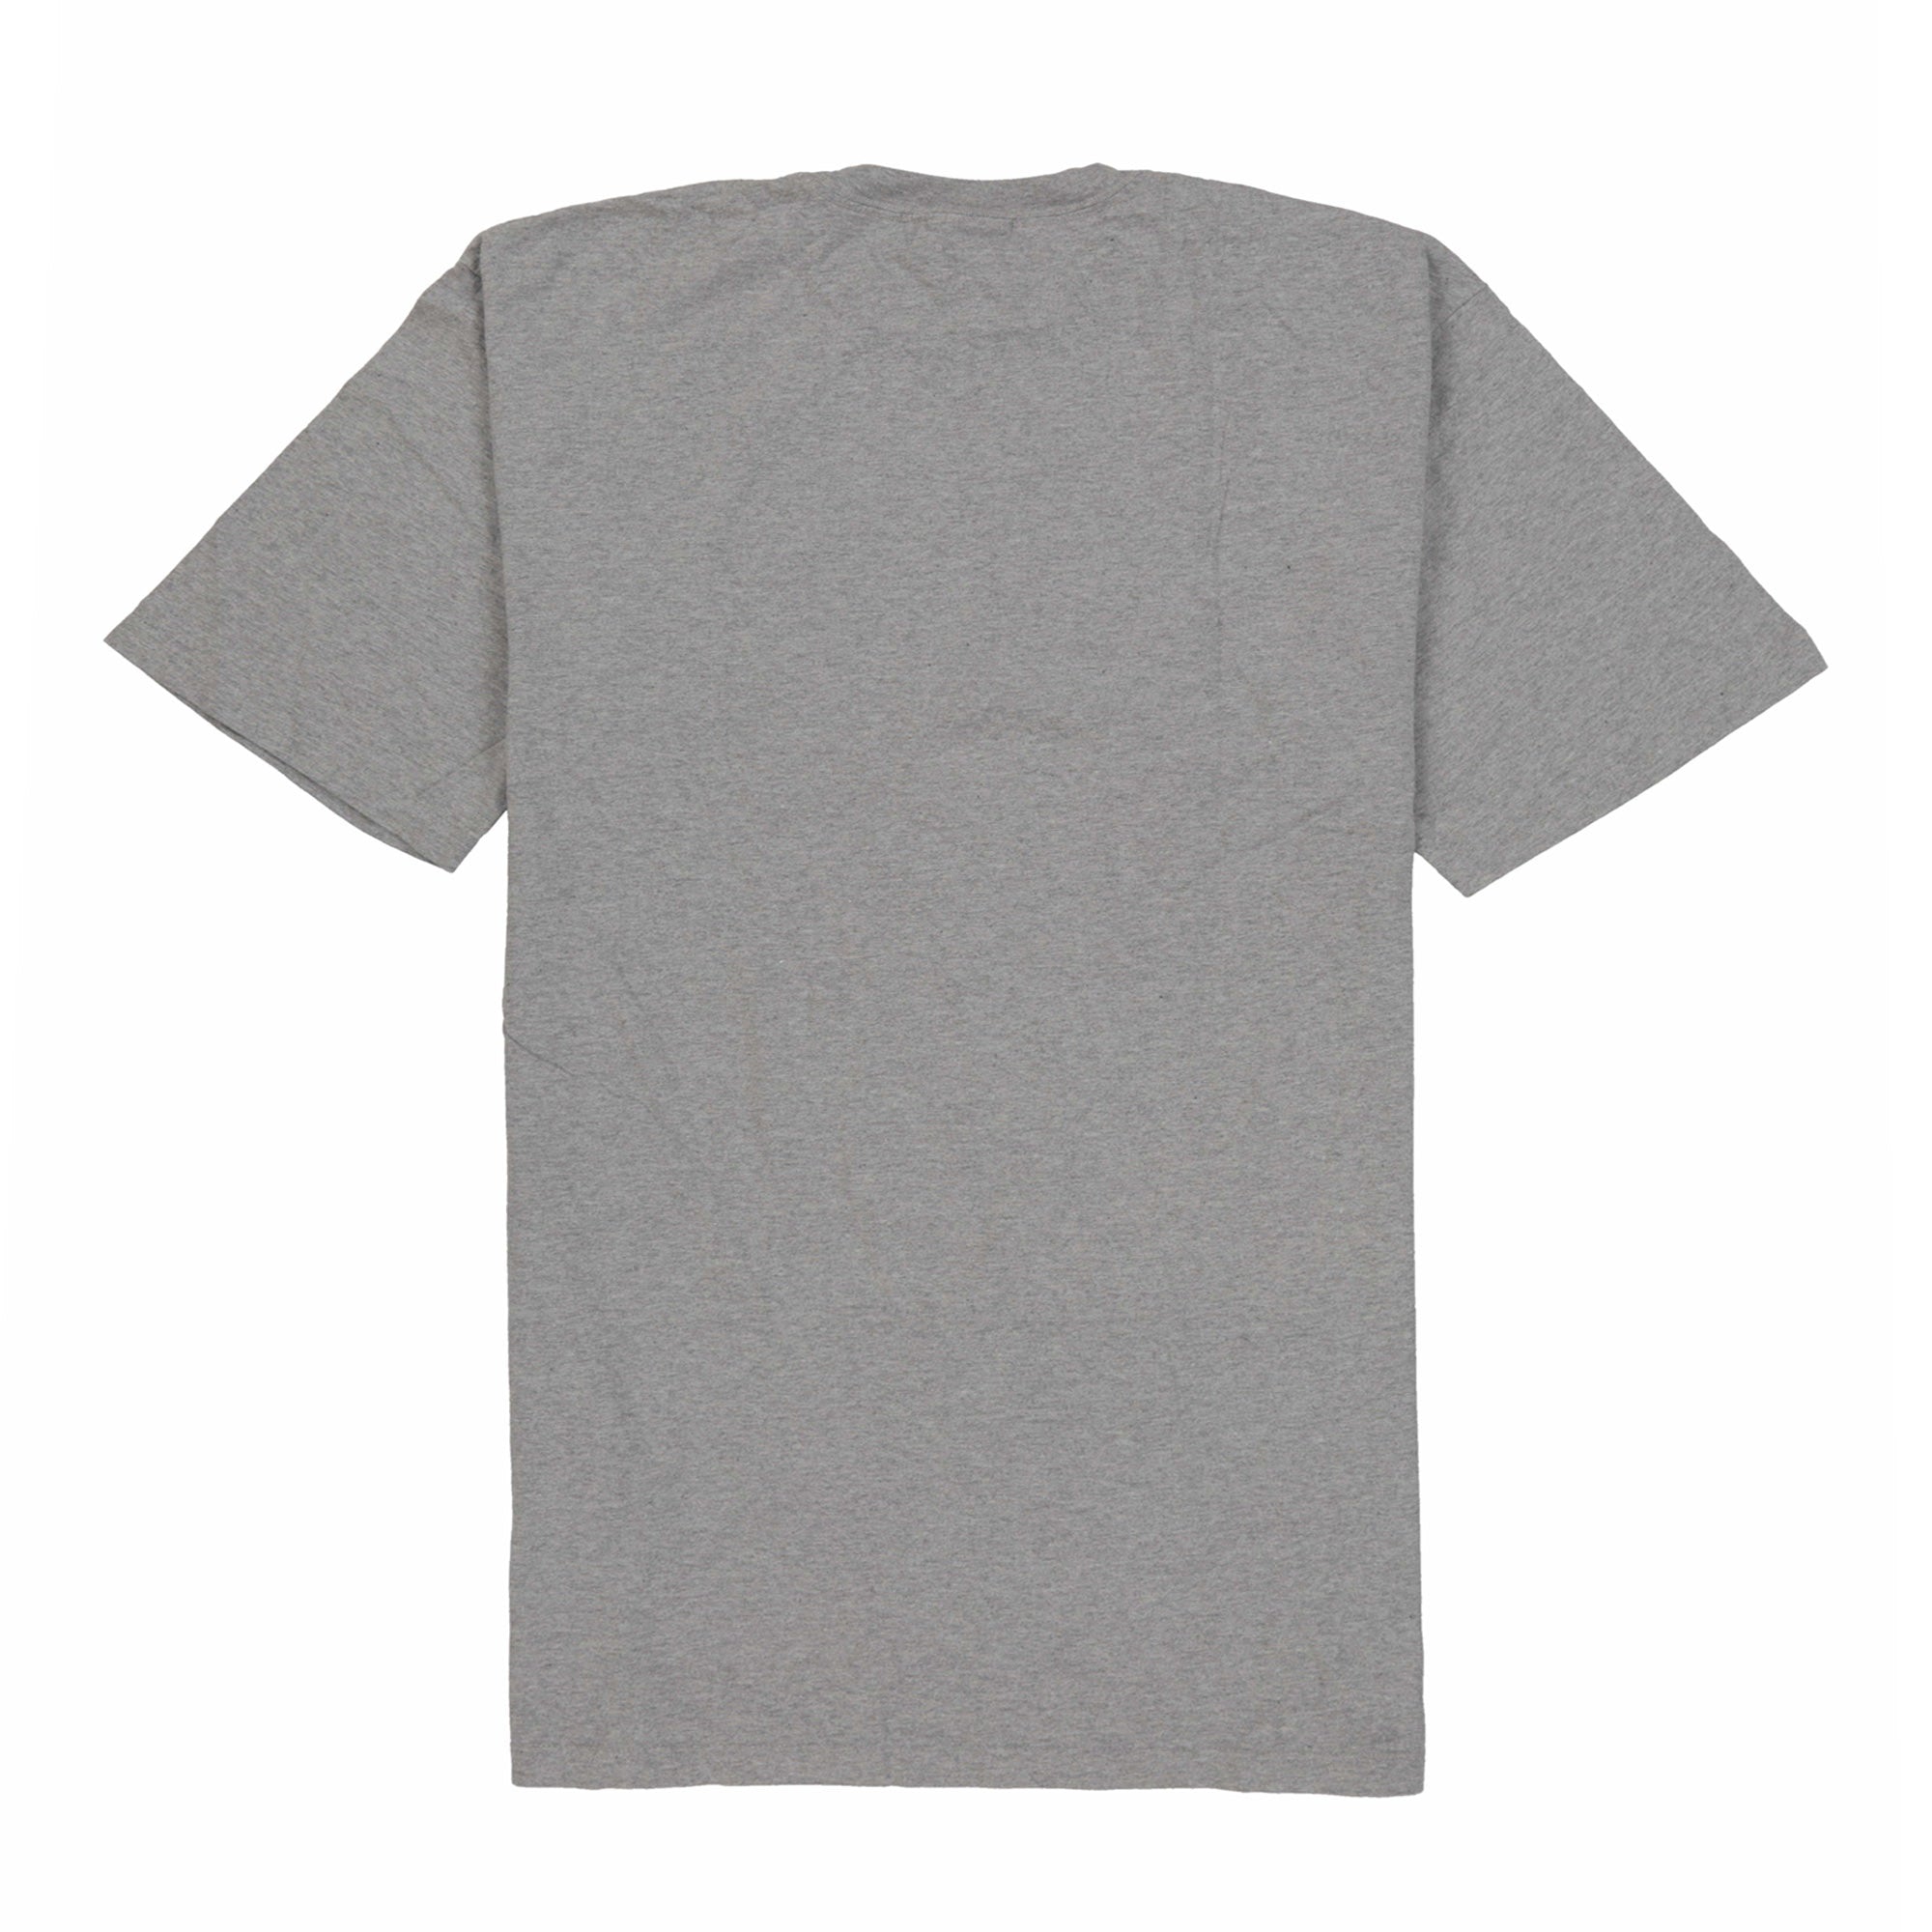 POLO SPORT EAGLE SPELL OUT LS TEE // HEATHER GREY